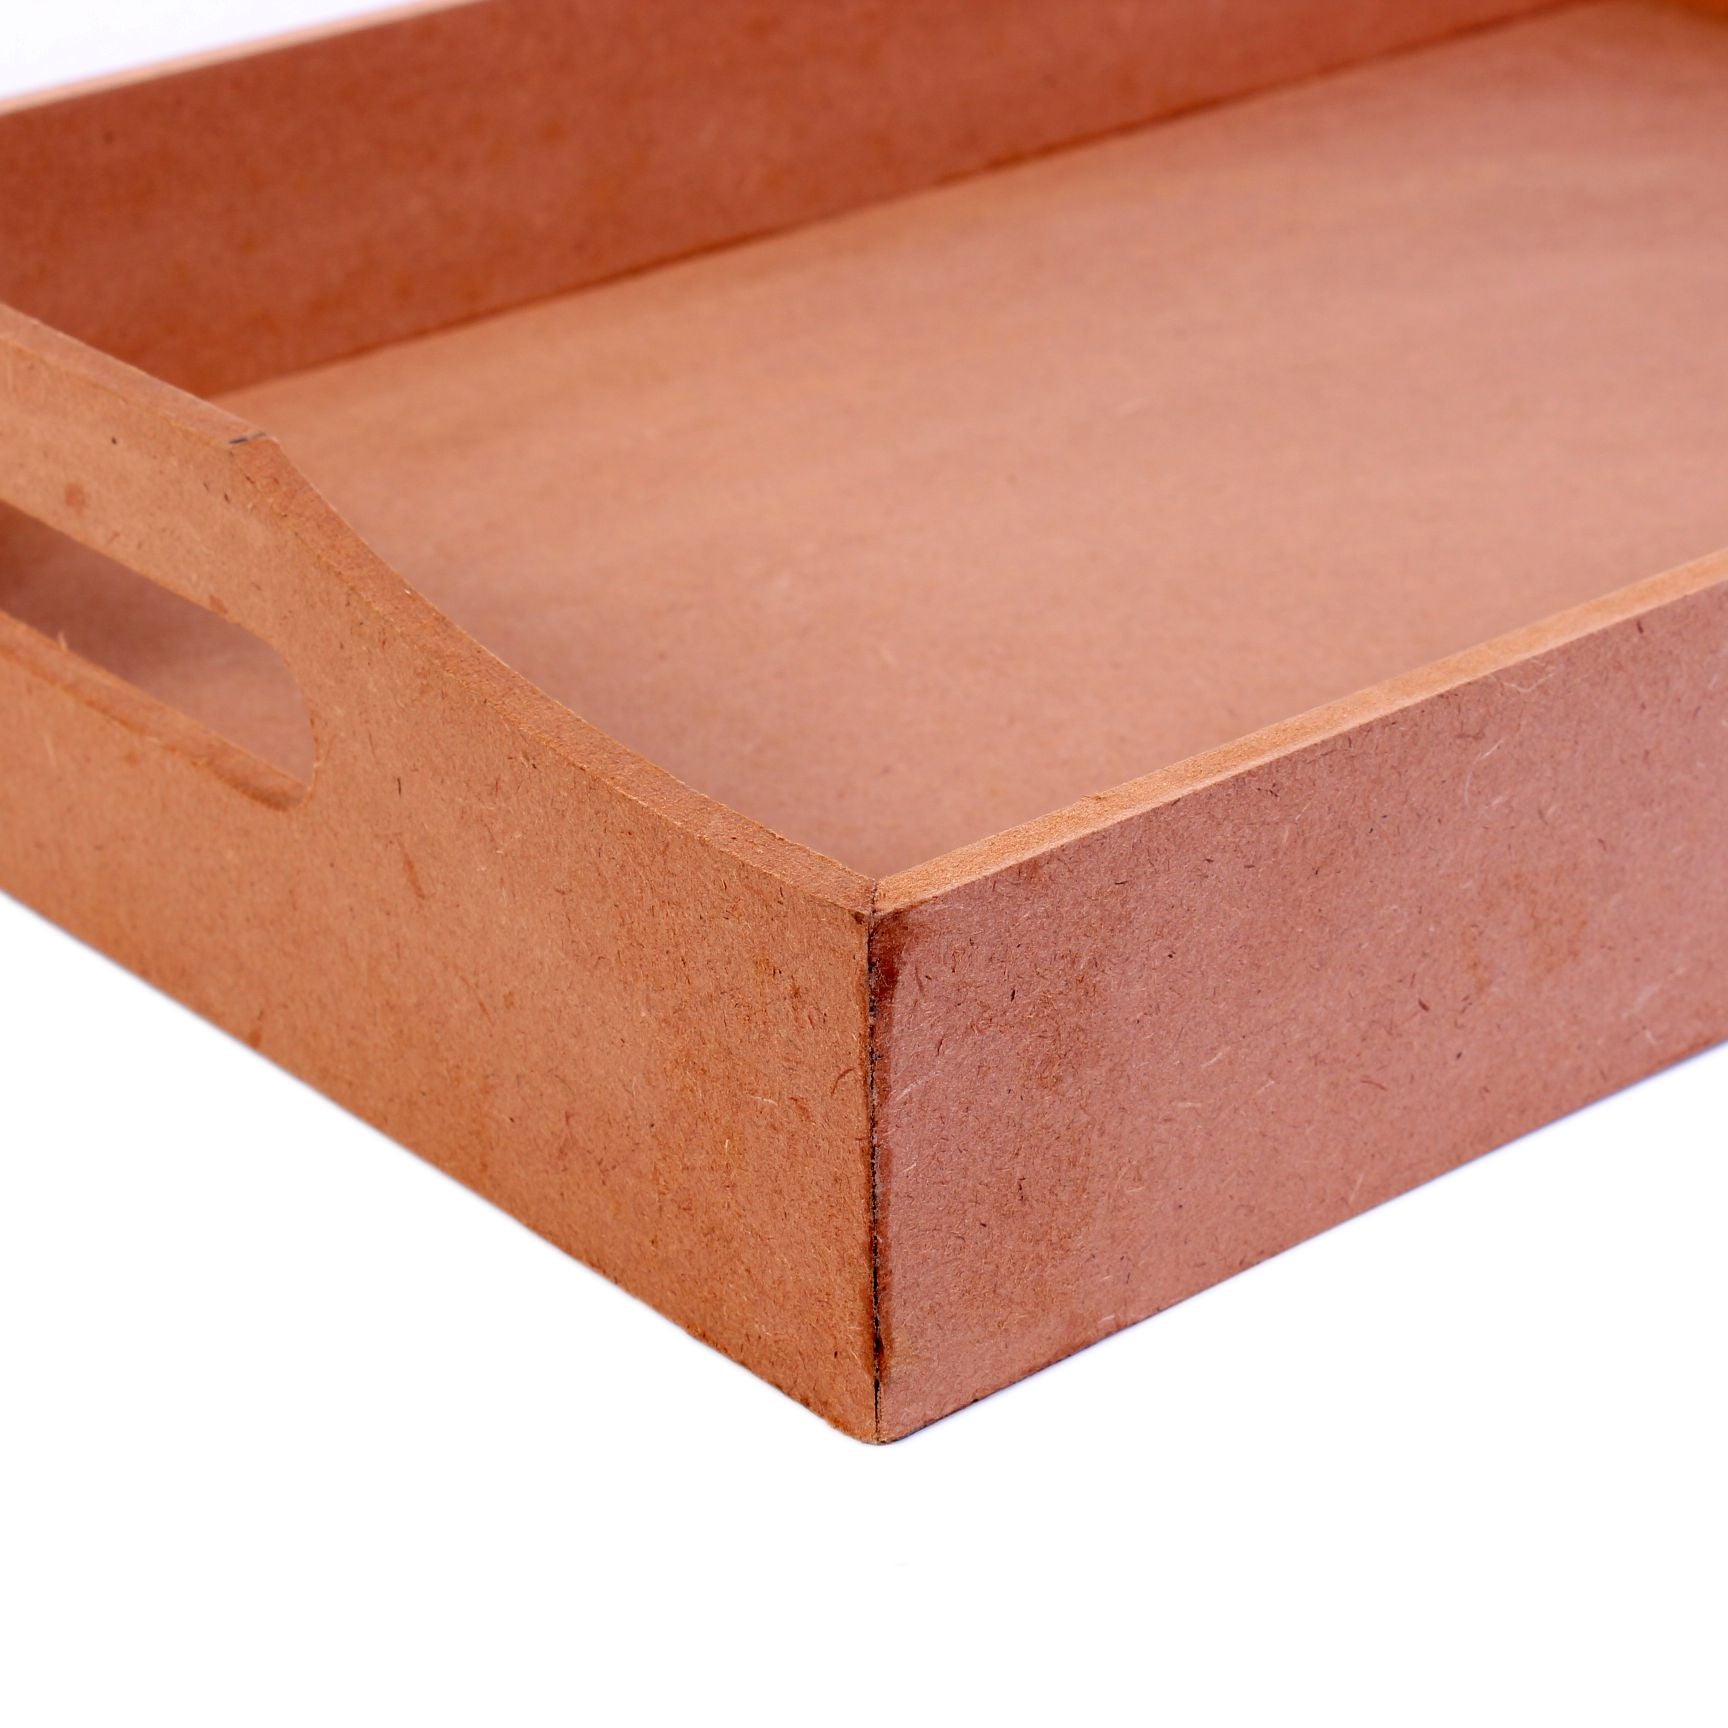 Mdf Serving Tray 10.5 X 15.5 X 2.75Inch 5.5Mm Thick 1Pc Lb